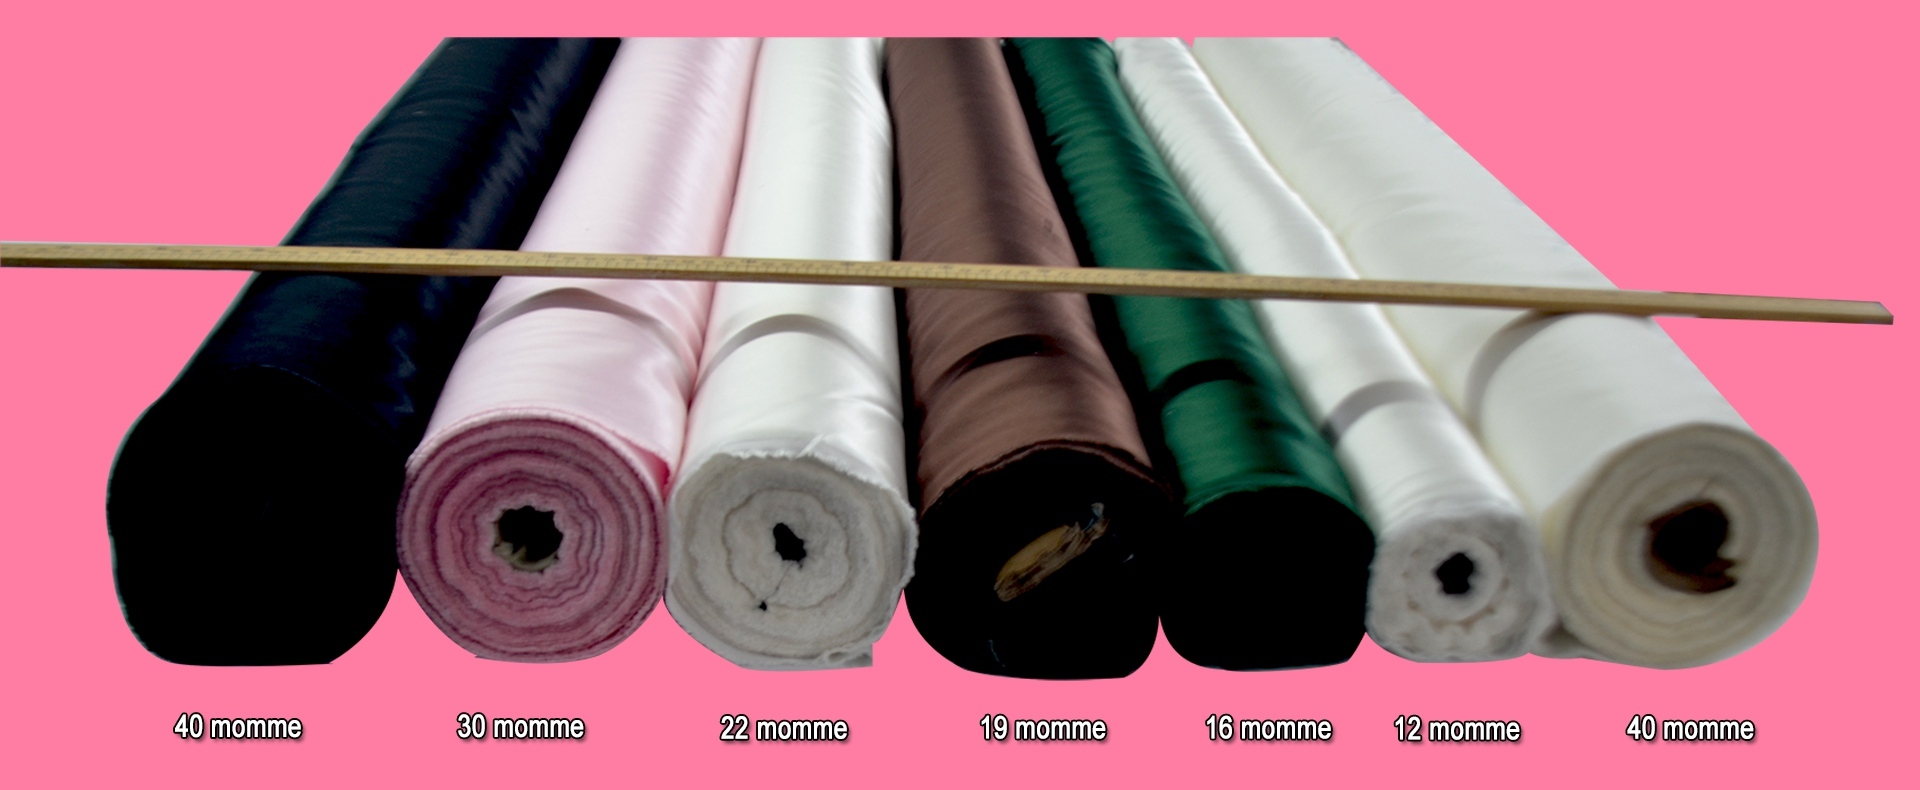 All Momme Weight Silk